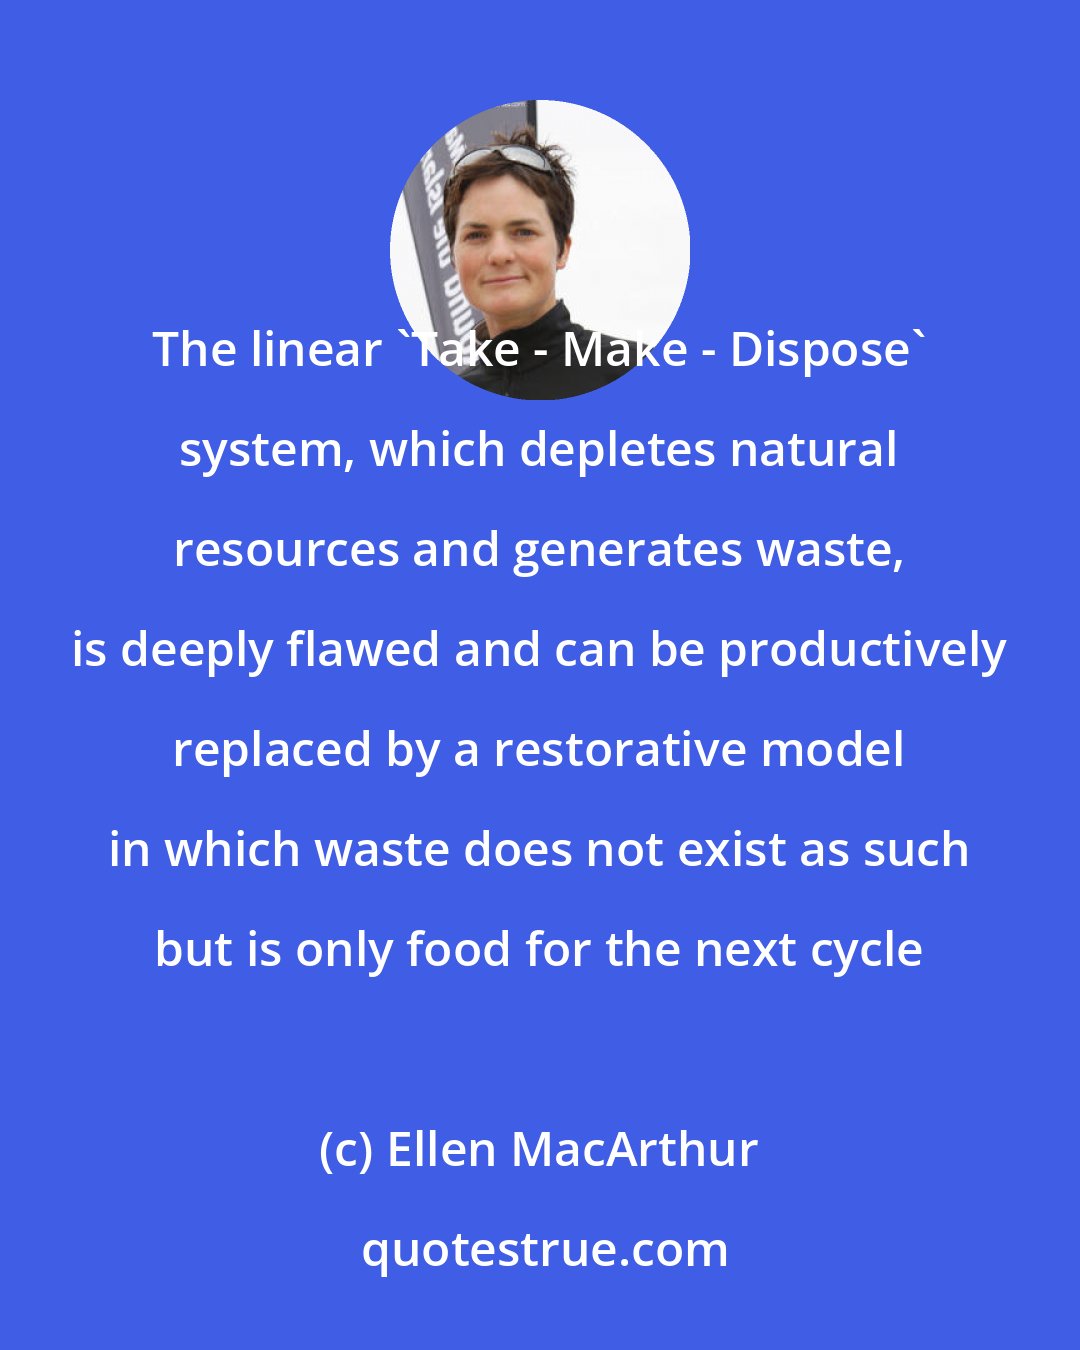 Ellen MacArthur: The linear 'Take - Make - Dispose' system, which depletes natural resources and generates waste, is deeply flawed and can be productively replaced by a restorative model in which waste does not exist as such but is only food for the next cycle